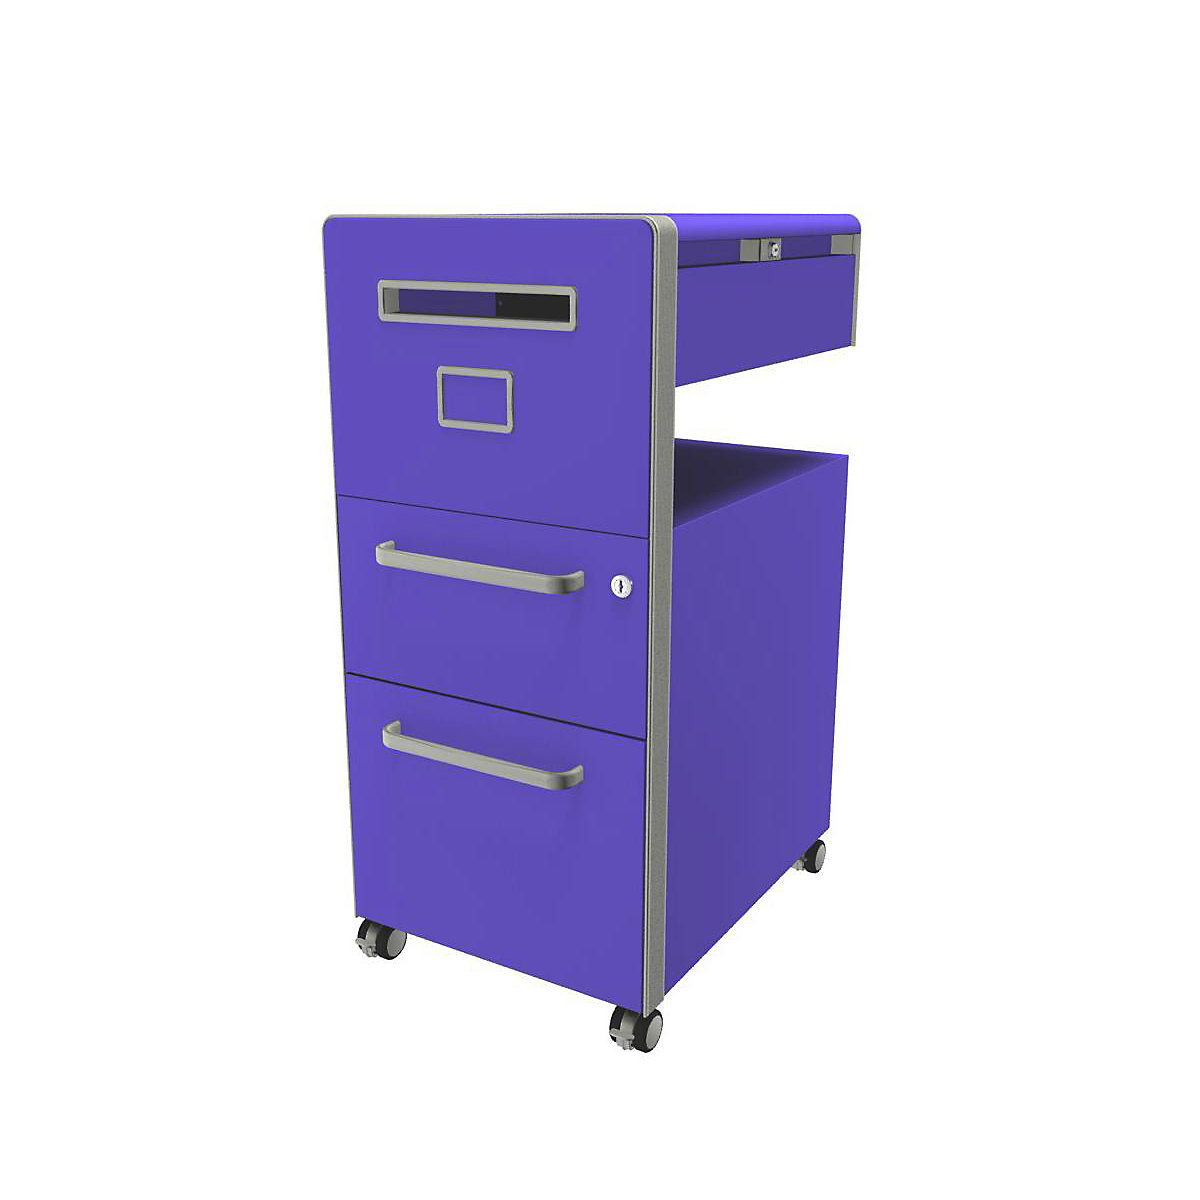 Bite™ pedestal furniture, with 1 whiteboard, opens on the left side – BISLEY